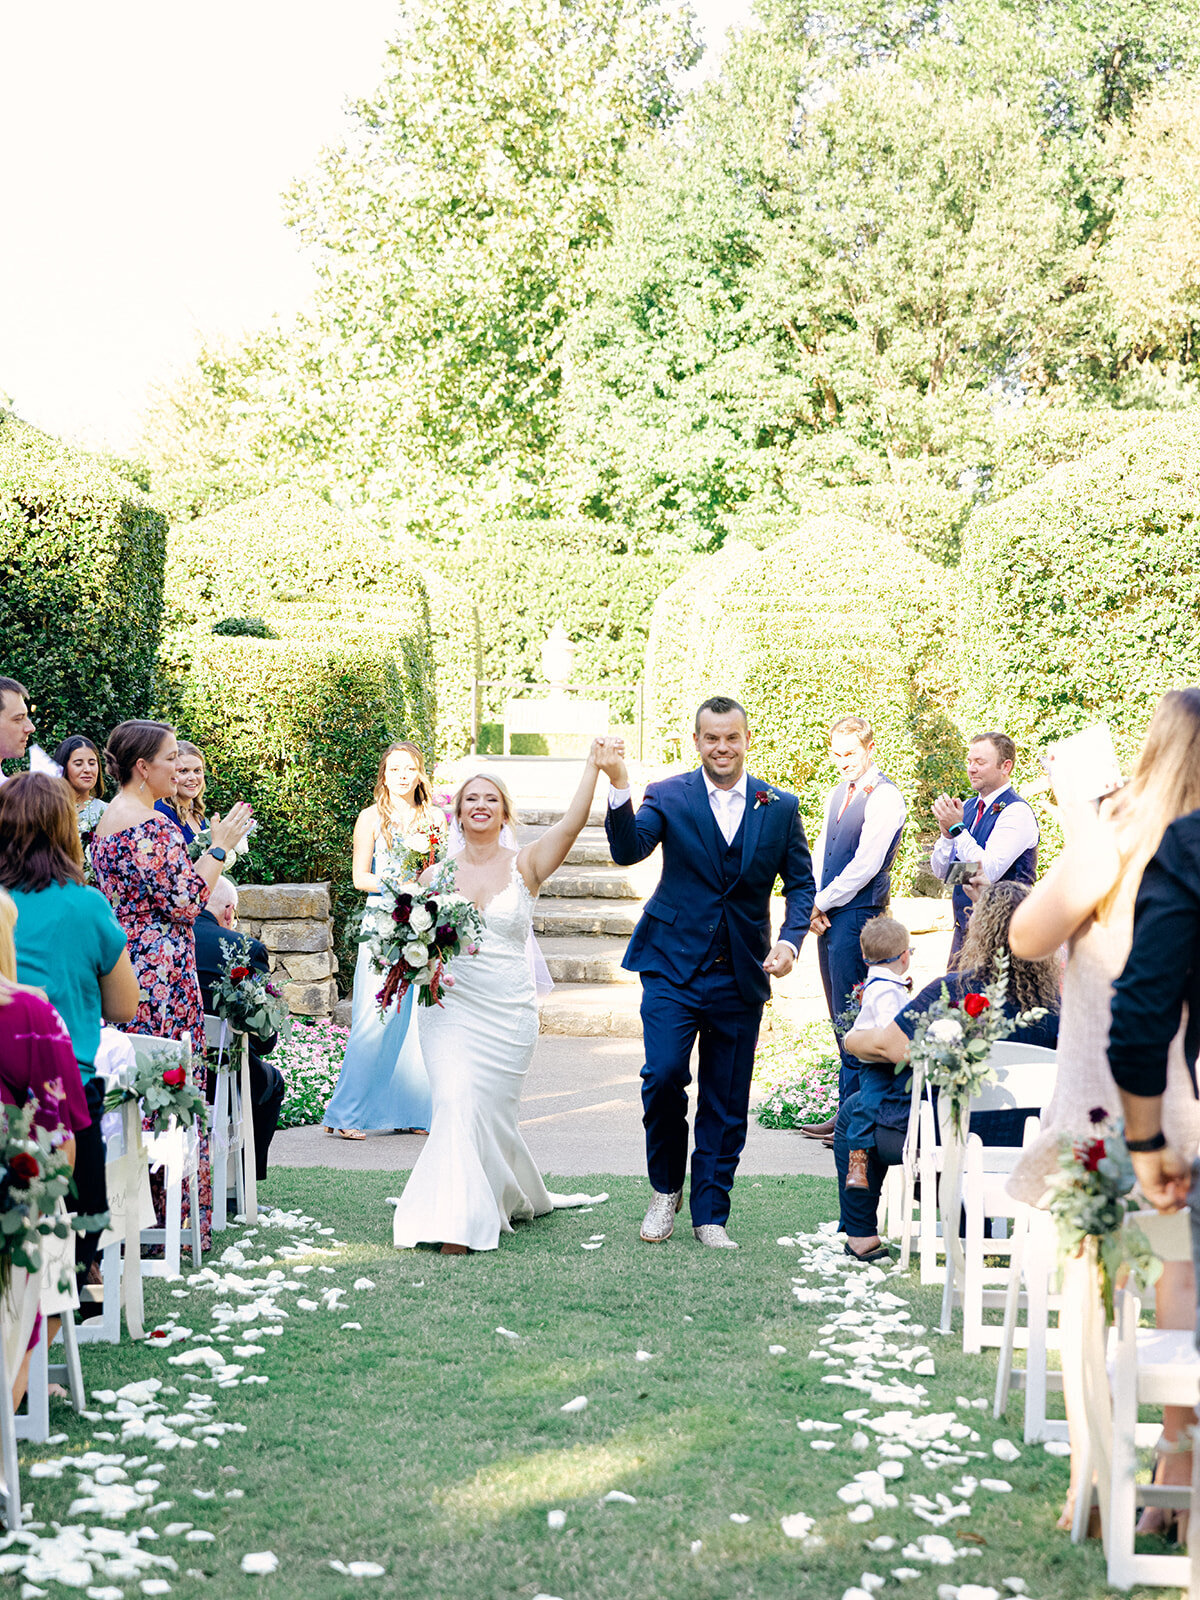 bride and groom holding hands and walking down the aisle at an outdoor wedding